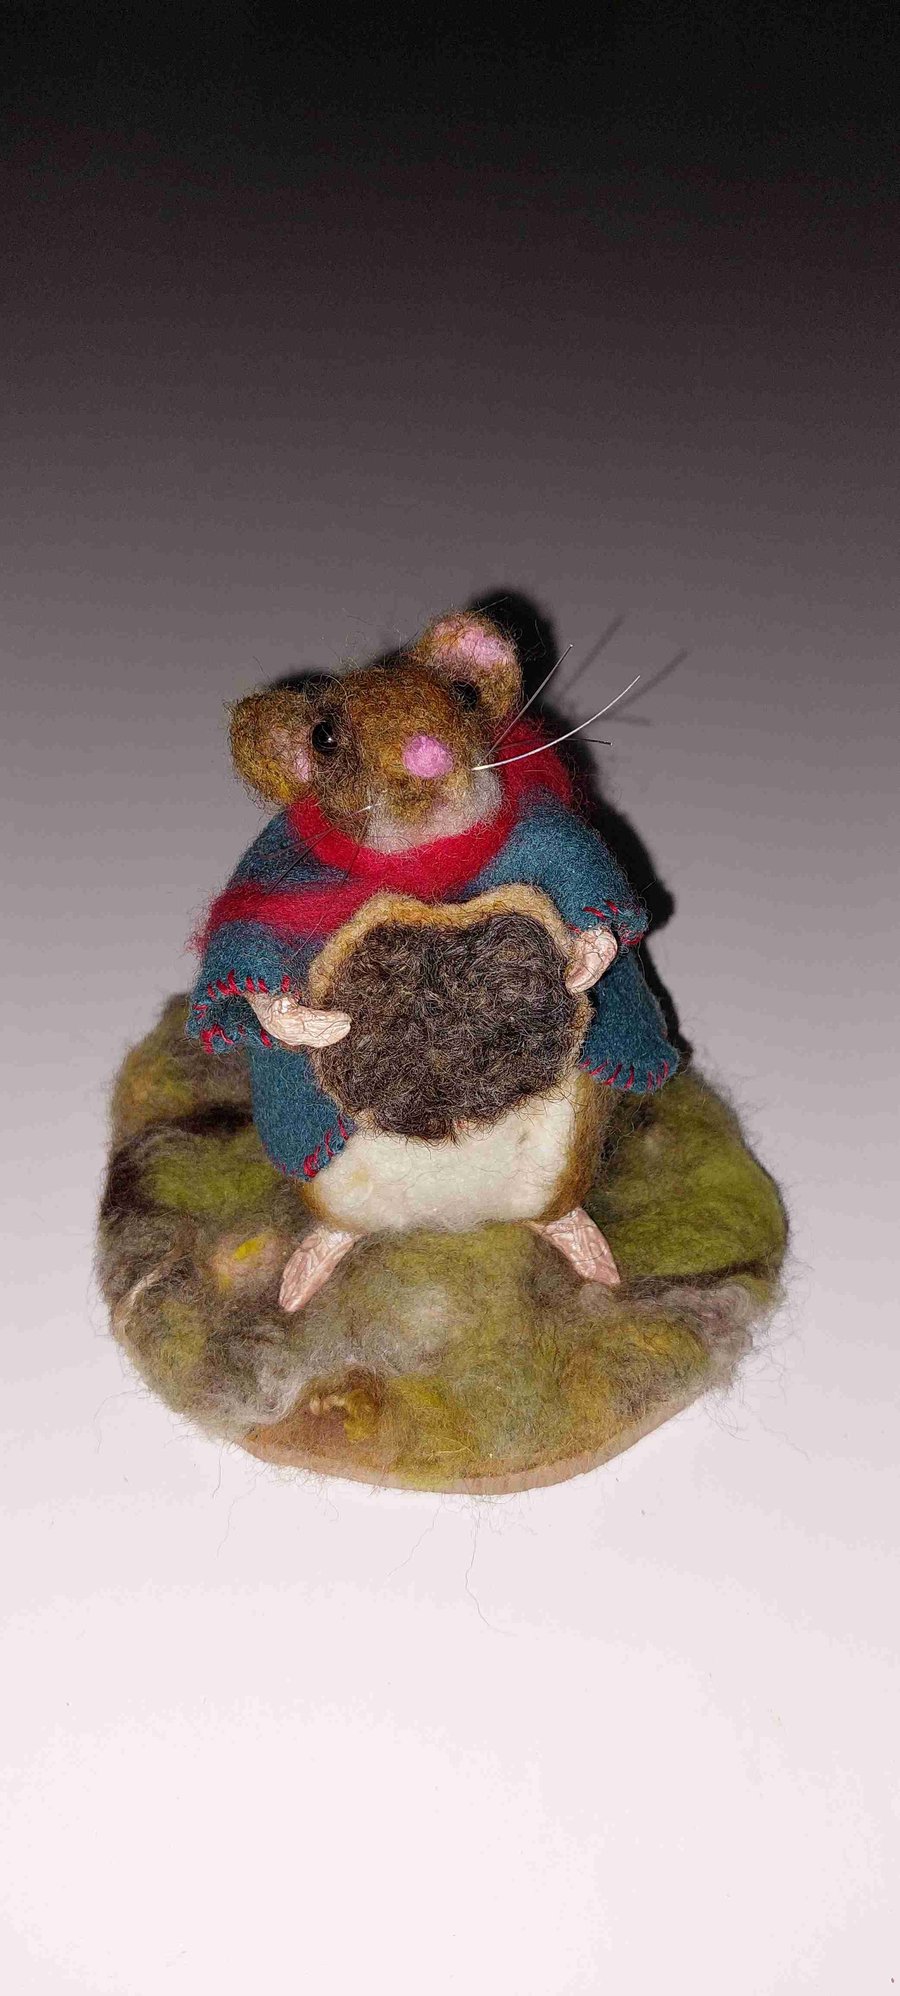 Mouse nibbling on a chocolate biscuit needle felt sculpture 